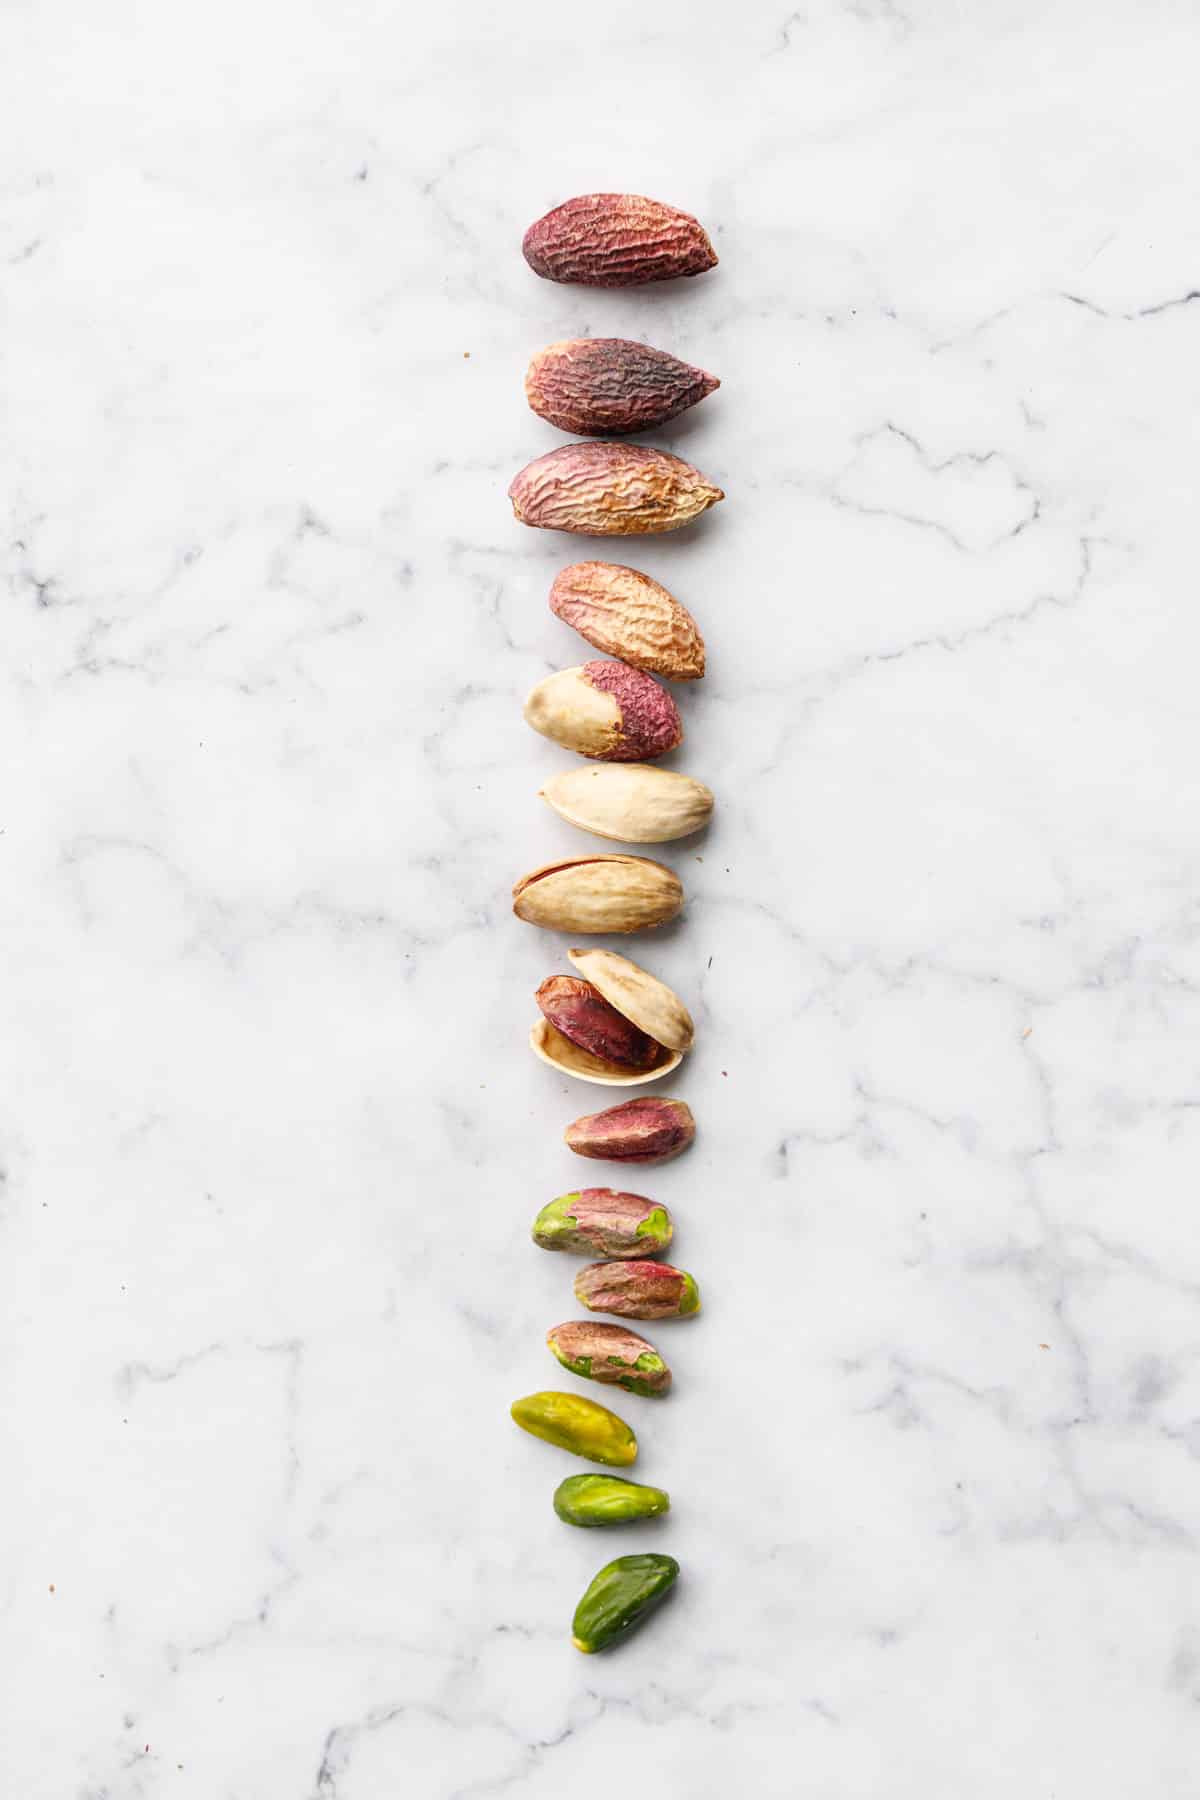 Gradient of pistachios, with whole nuts still in the outer skins at the top, down to the fully peeled and blanched bright green nuts at the bottom.